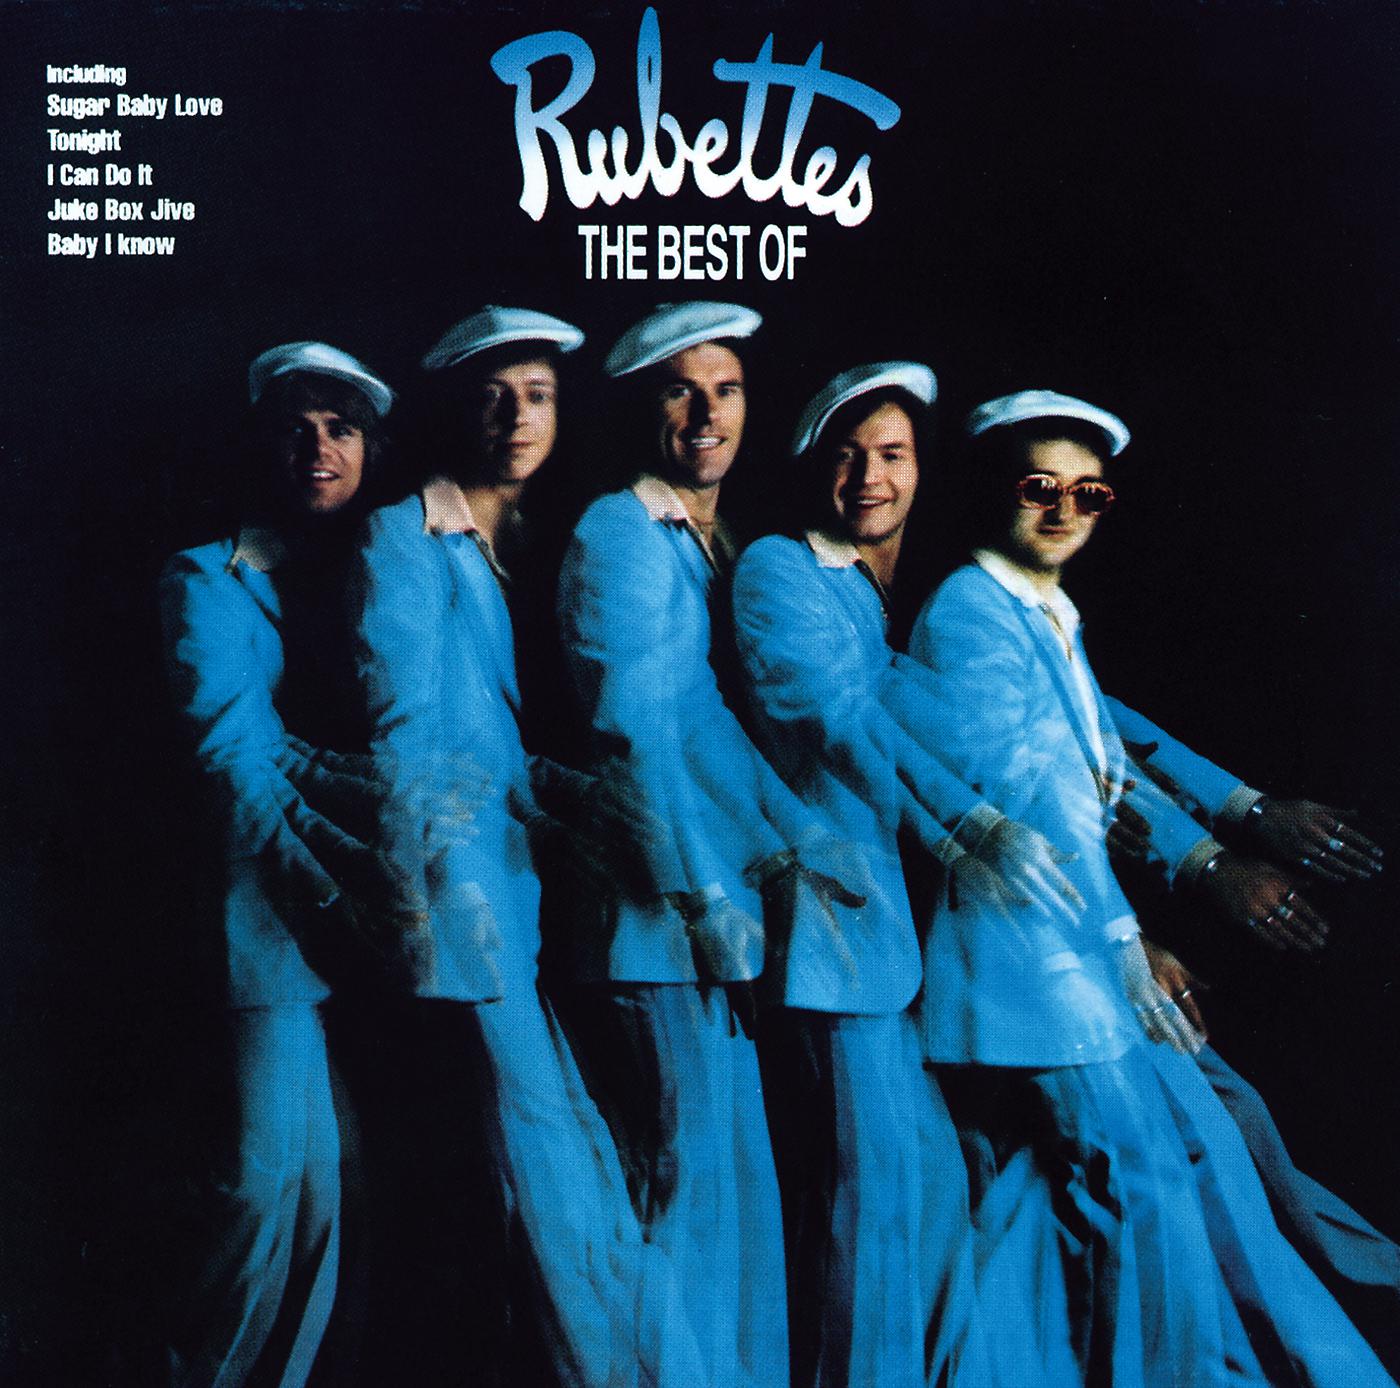 Baby we can. The Rubettes LP. The Rubettes - 1975 - Rubettes. The Rubettes 1975 we can do it. The best of the Rubettes.